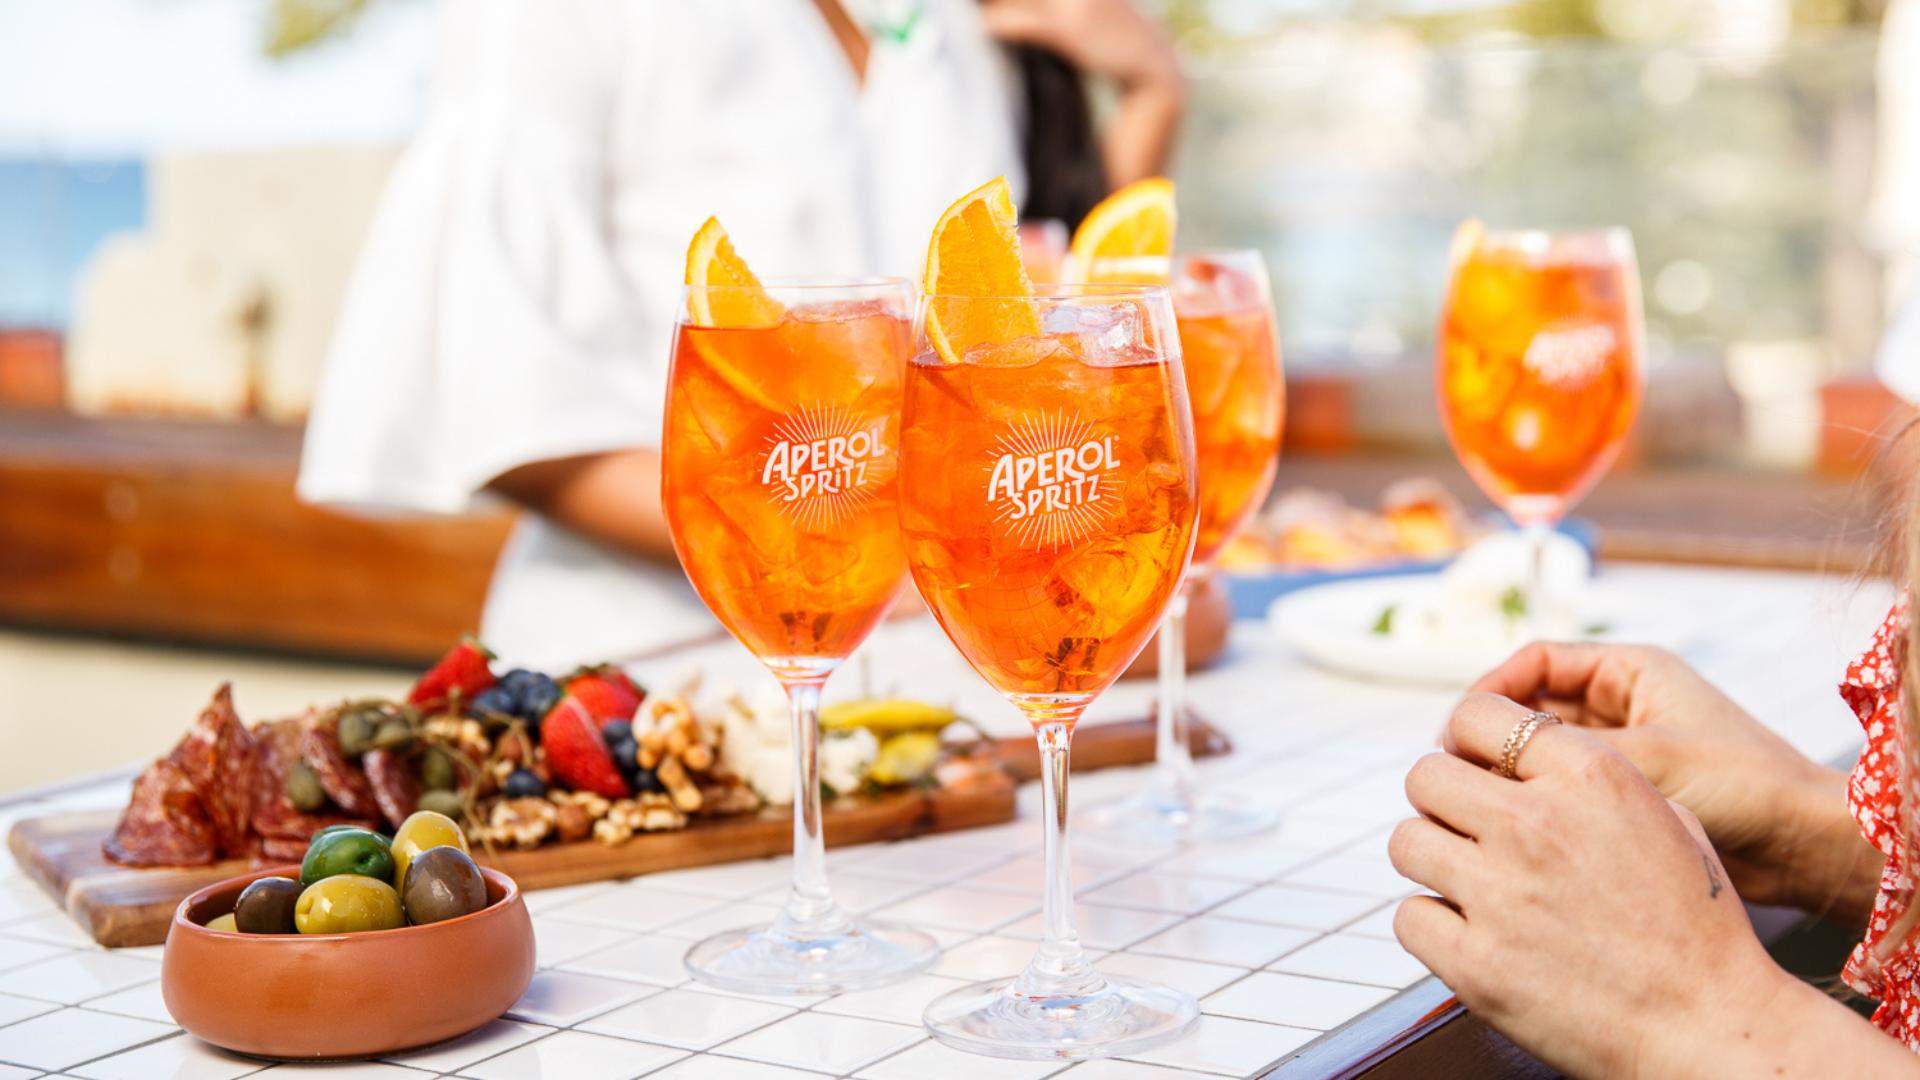 Aperol Is Shouting Spritzes This Spring